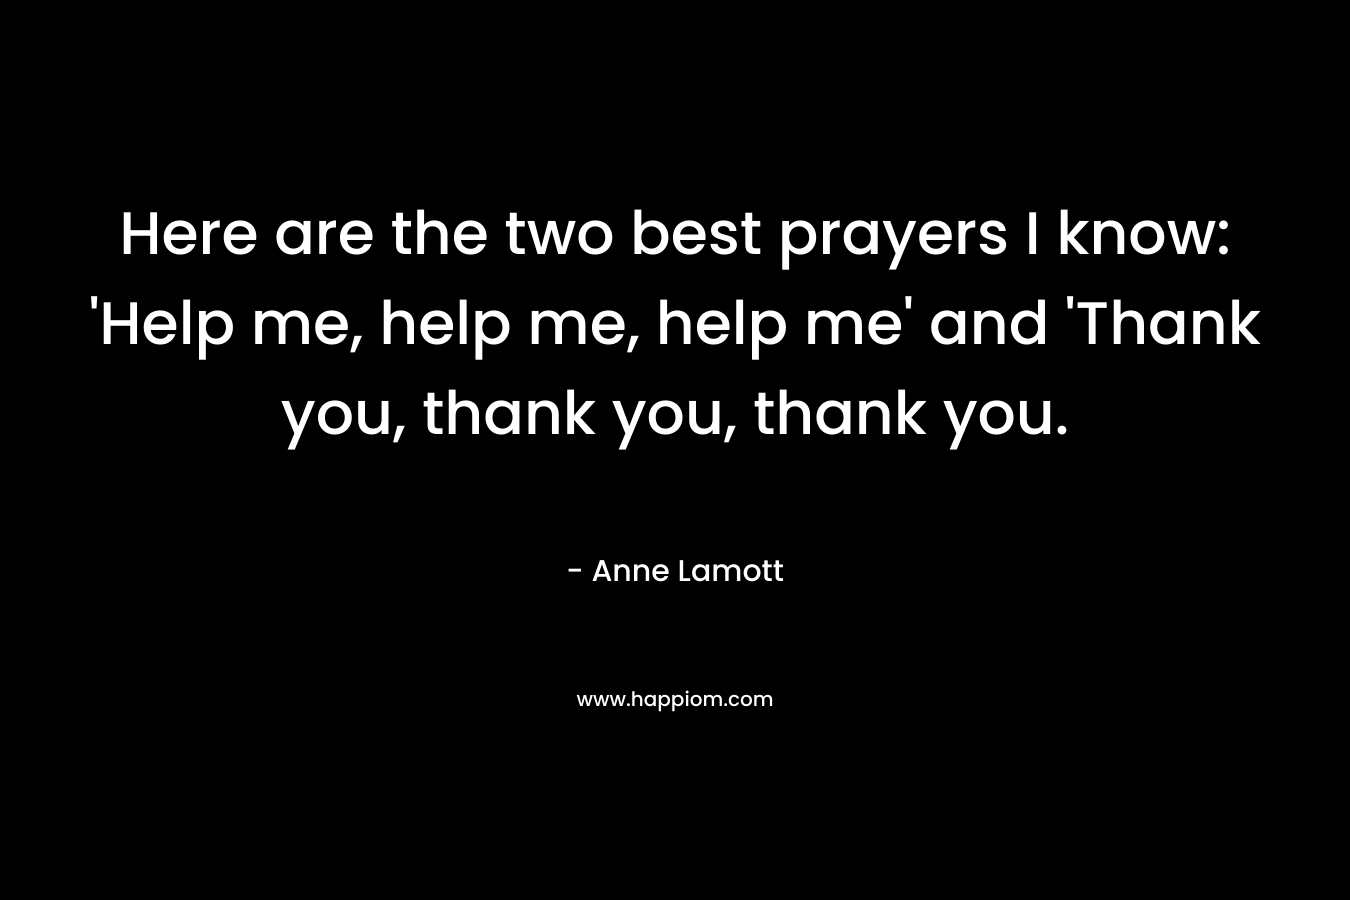 Here are the two best prayers I know: 'Help me, help me, help me' and 'Thank you, thank you, thank you.